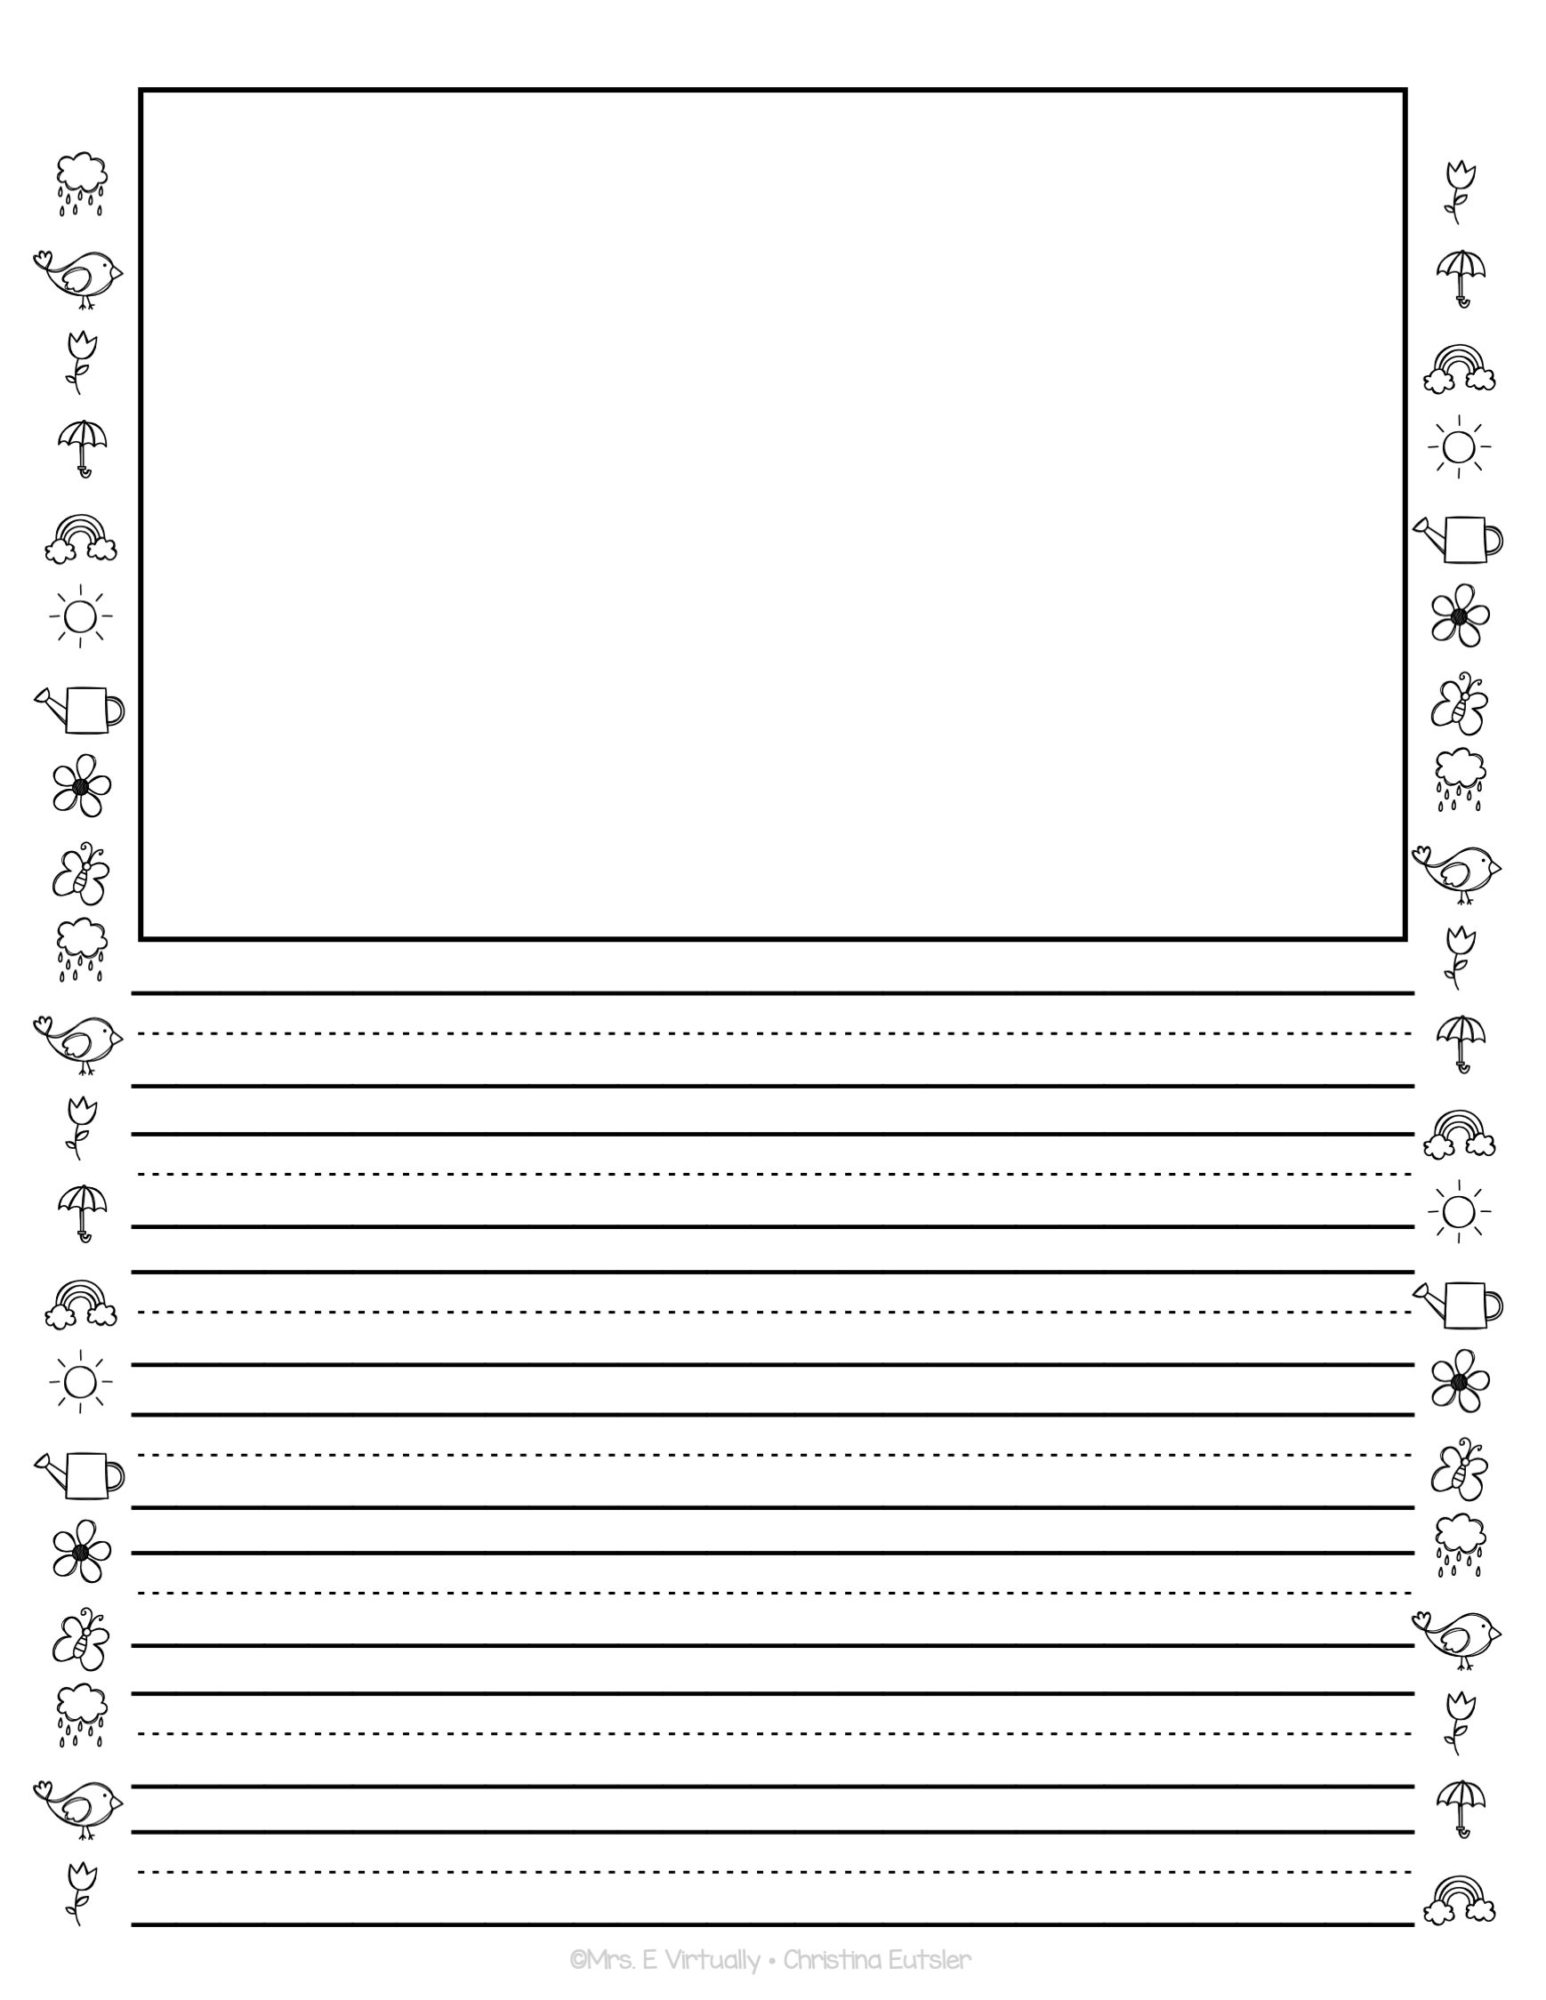 lined stationery paper